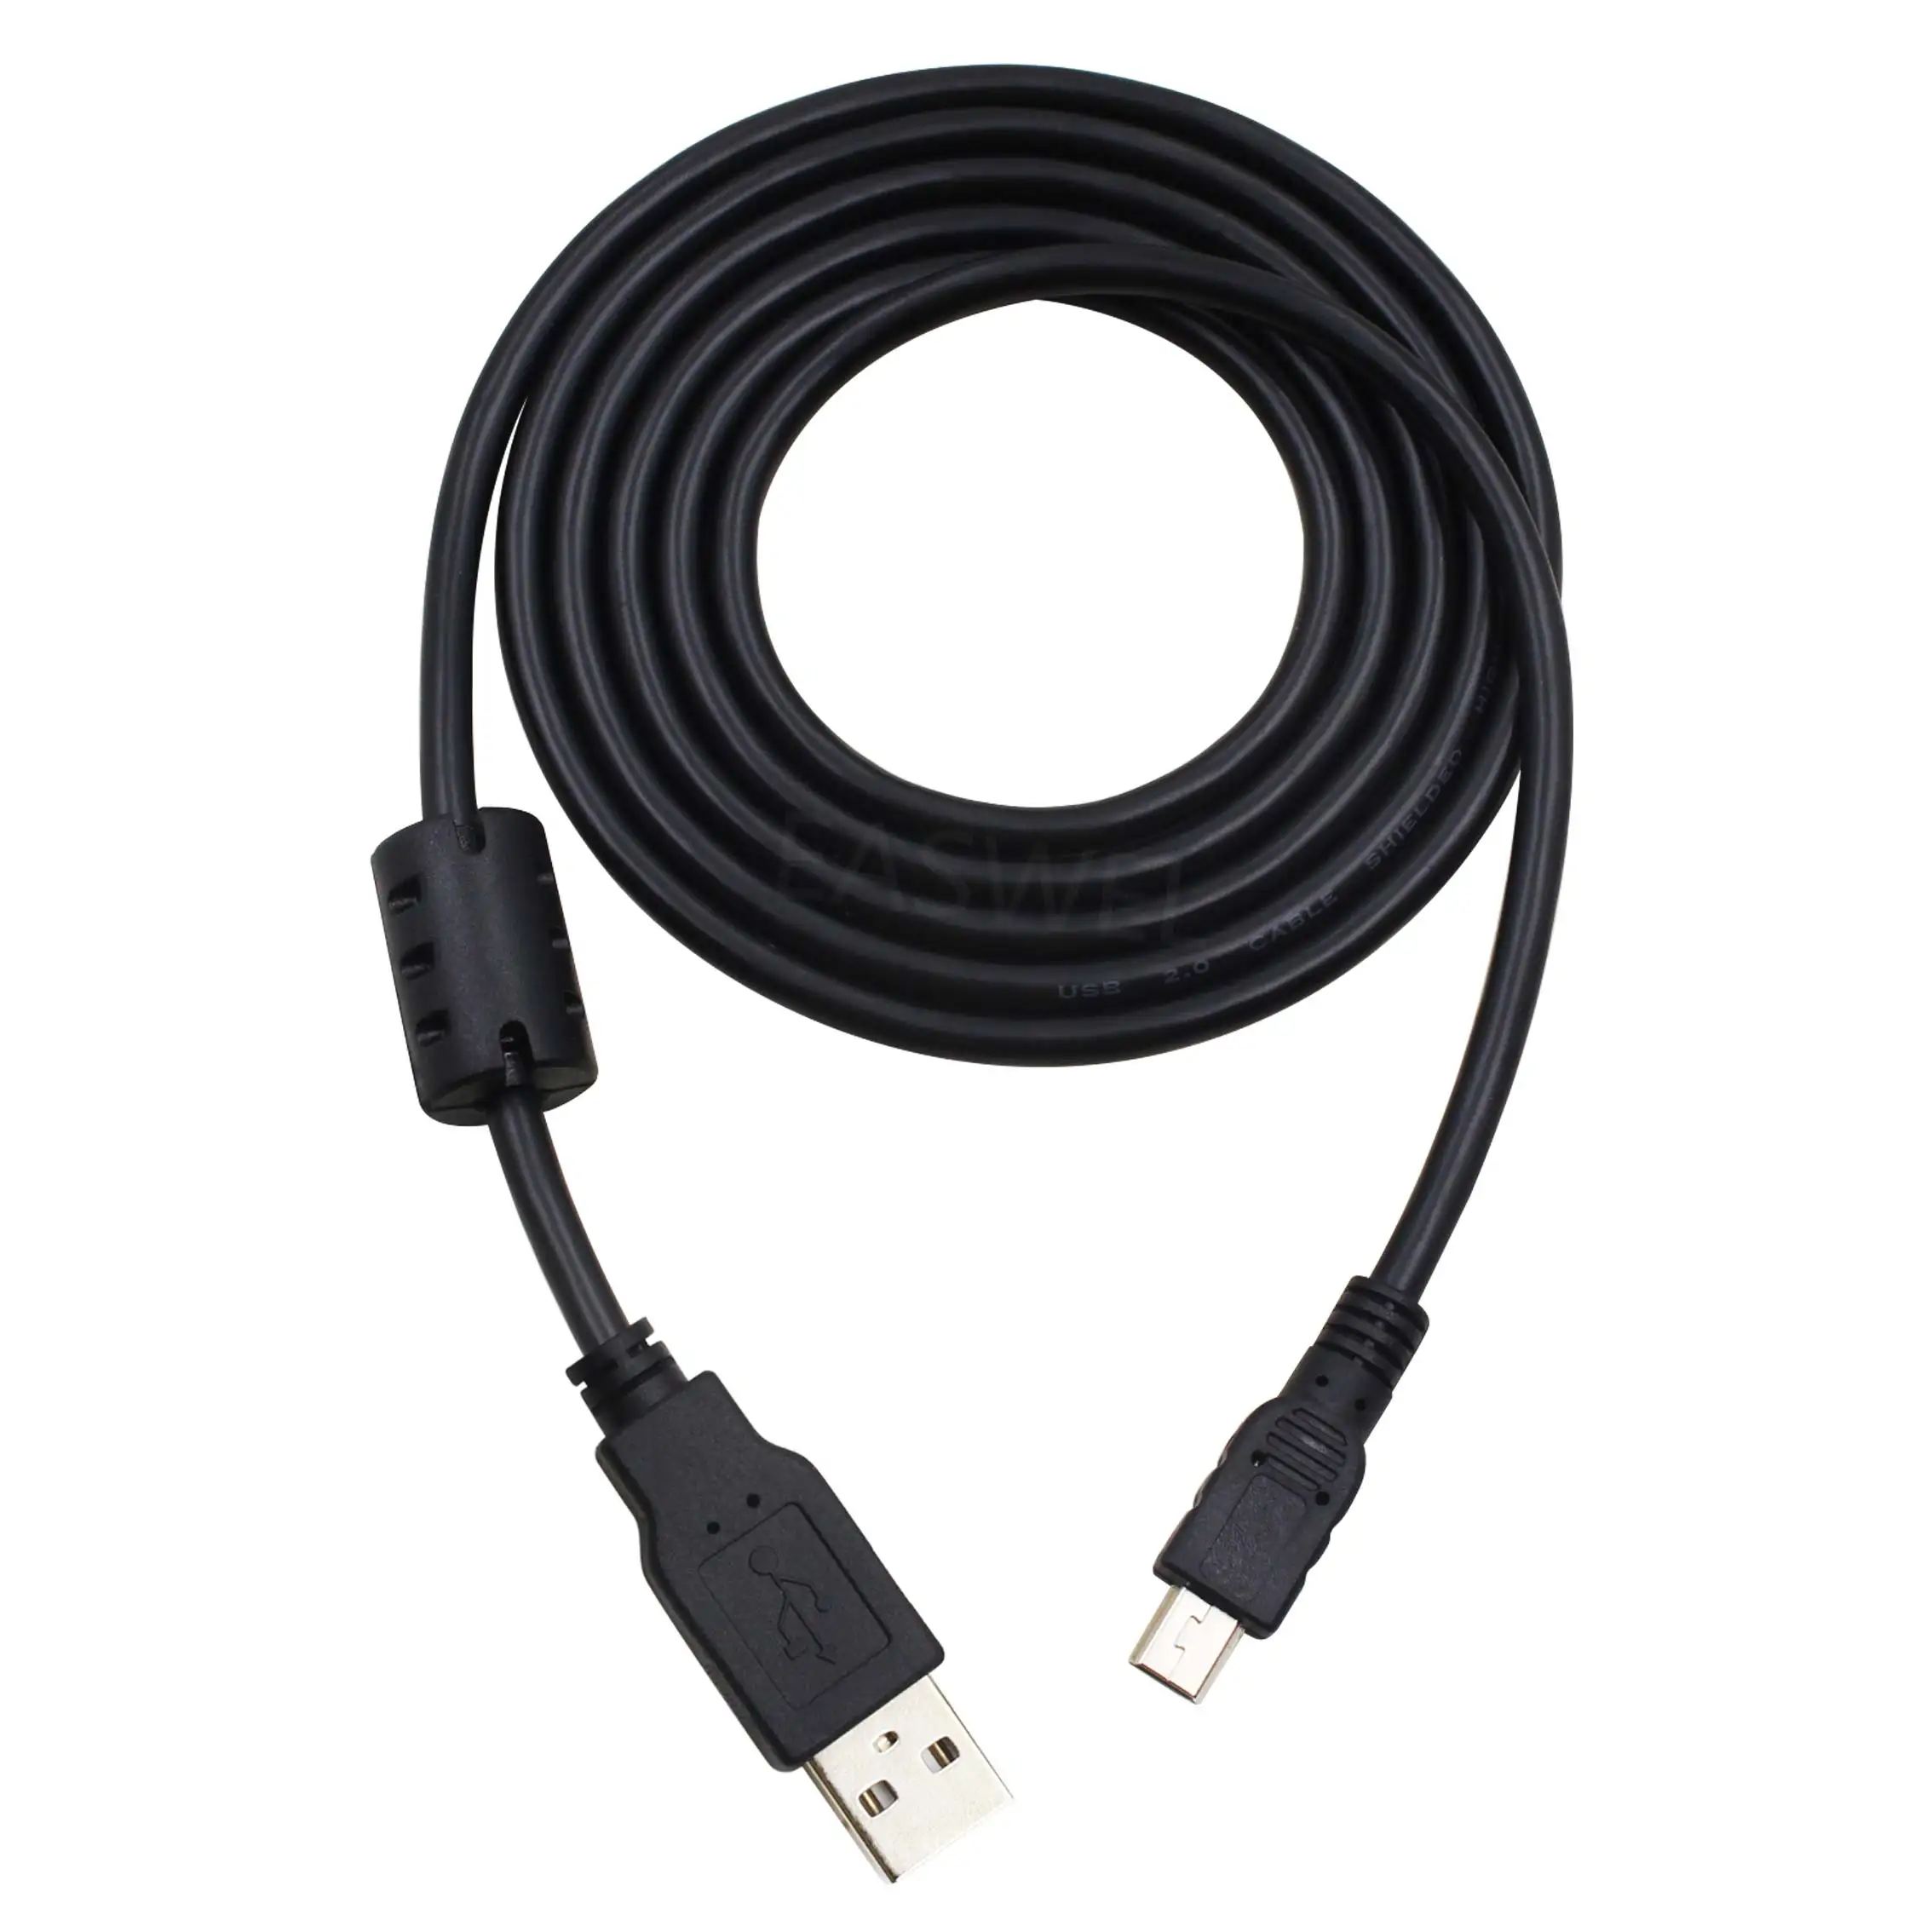 SONY  DCR-SR47,DCR-SR47/L CAMERA USB DATA SYNC CABLE LEAD FOR PC AND MAC 